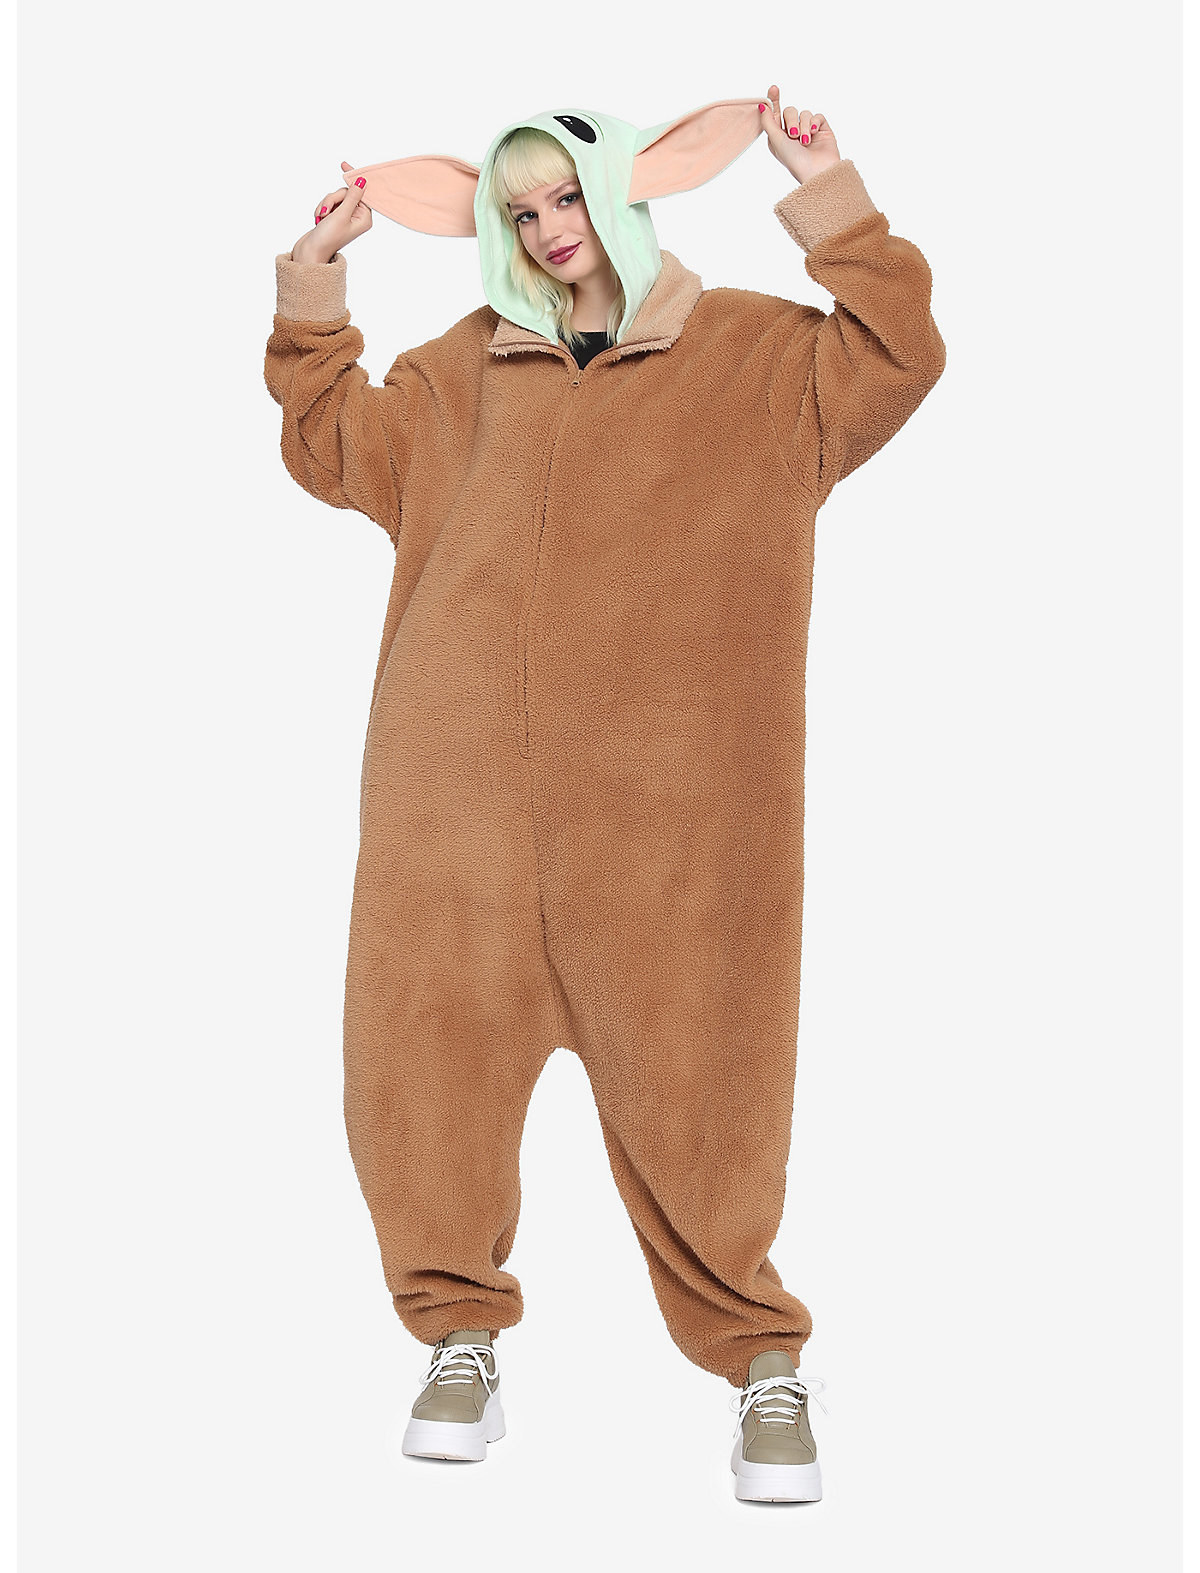 A model in the onesie with a hood that looks like baby yoda